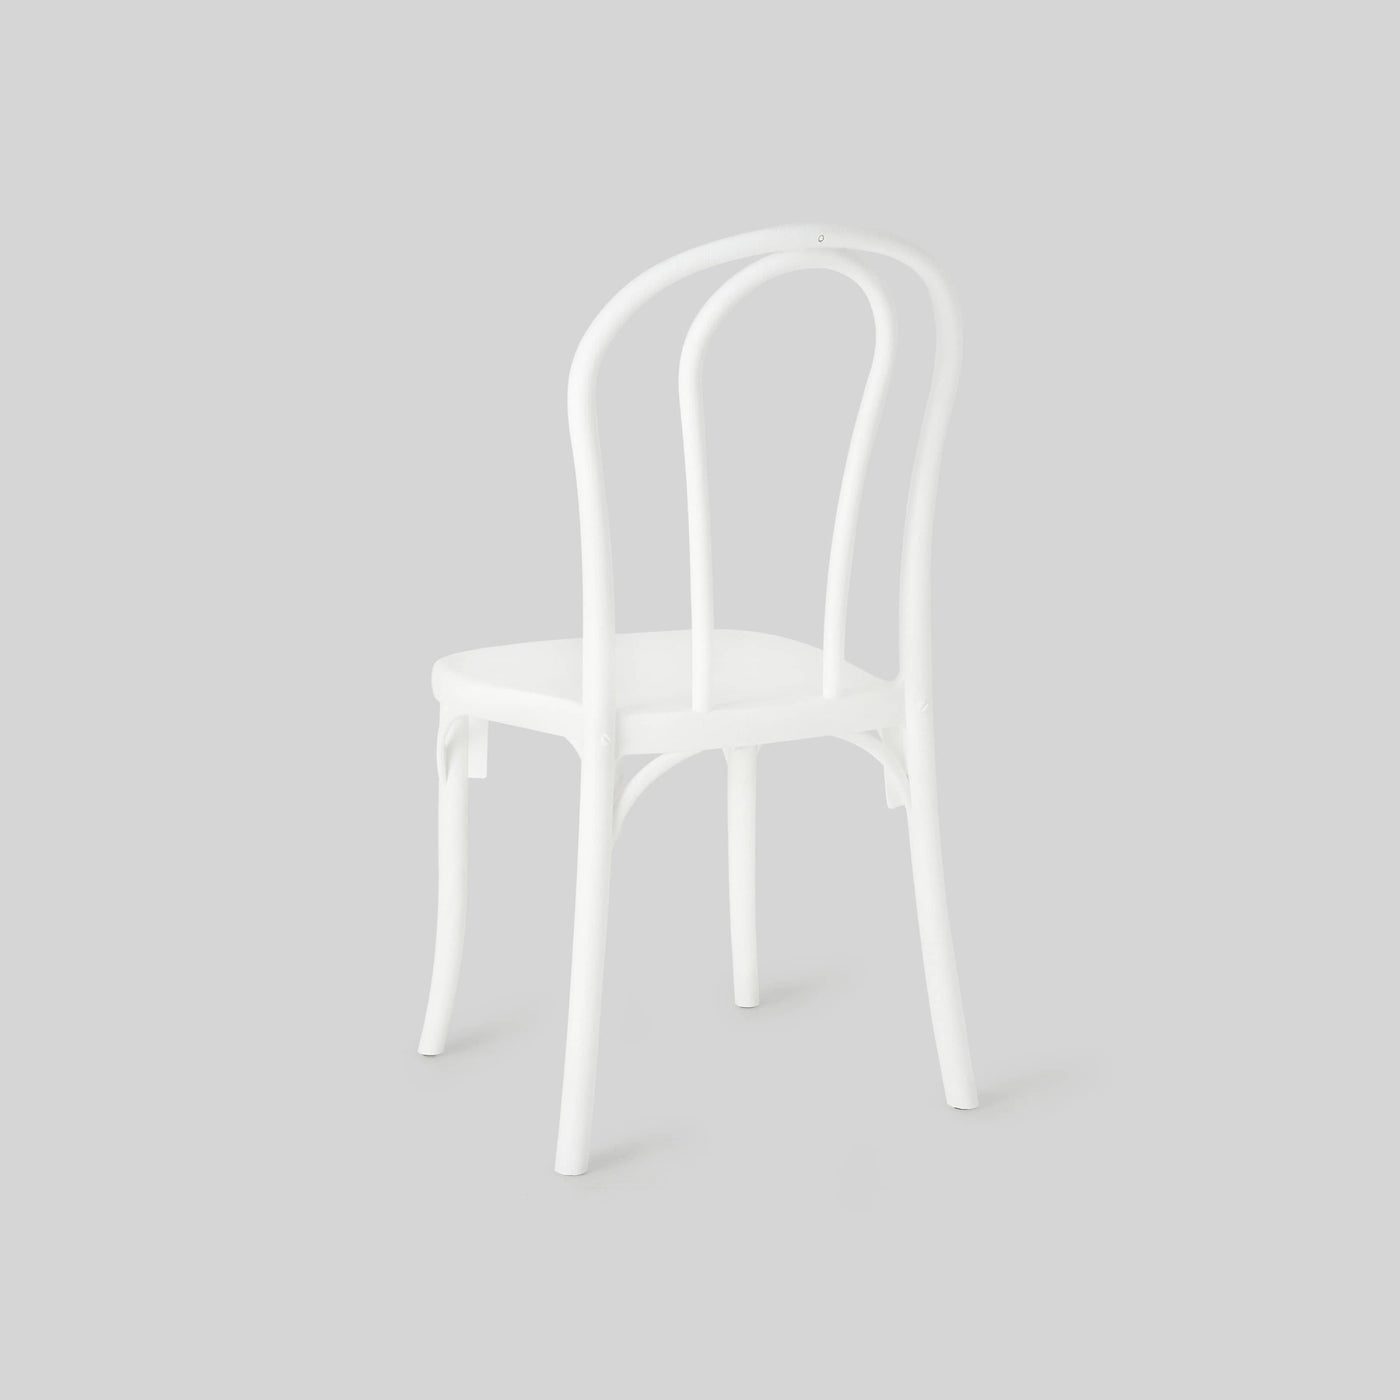 Rapha Set of 4 Dining Chairs, White - 4